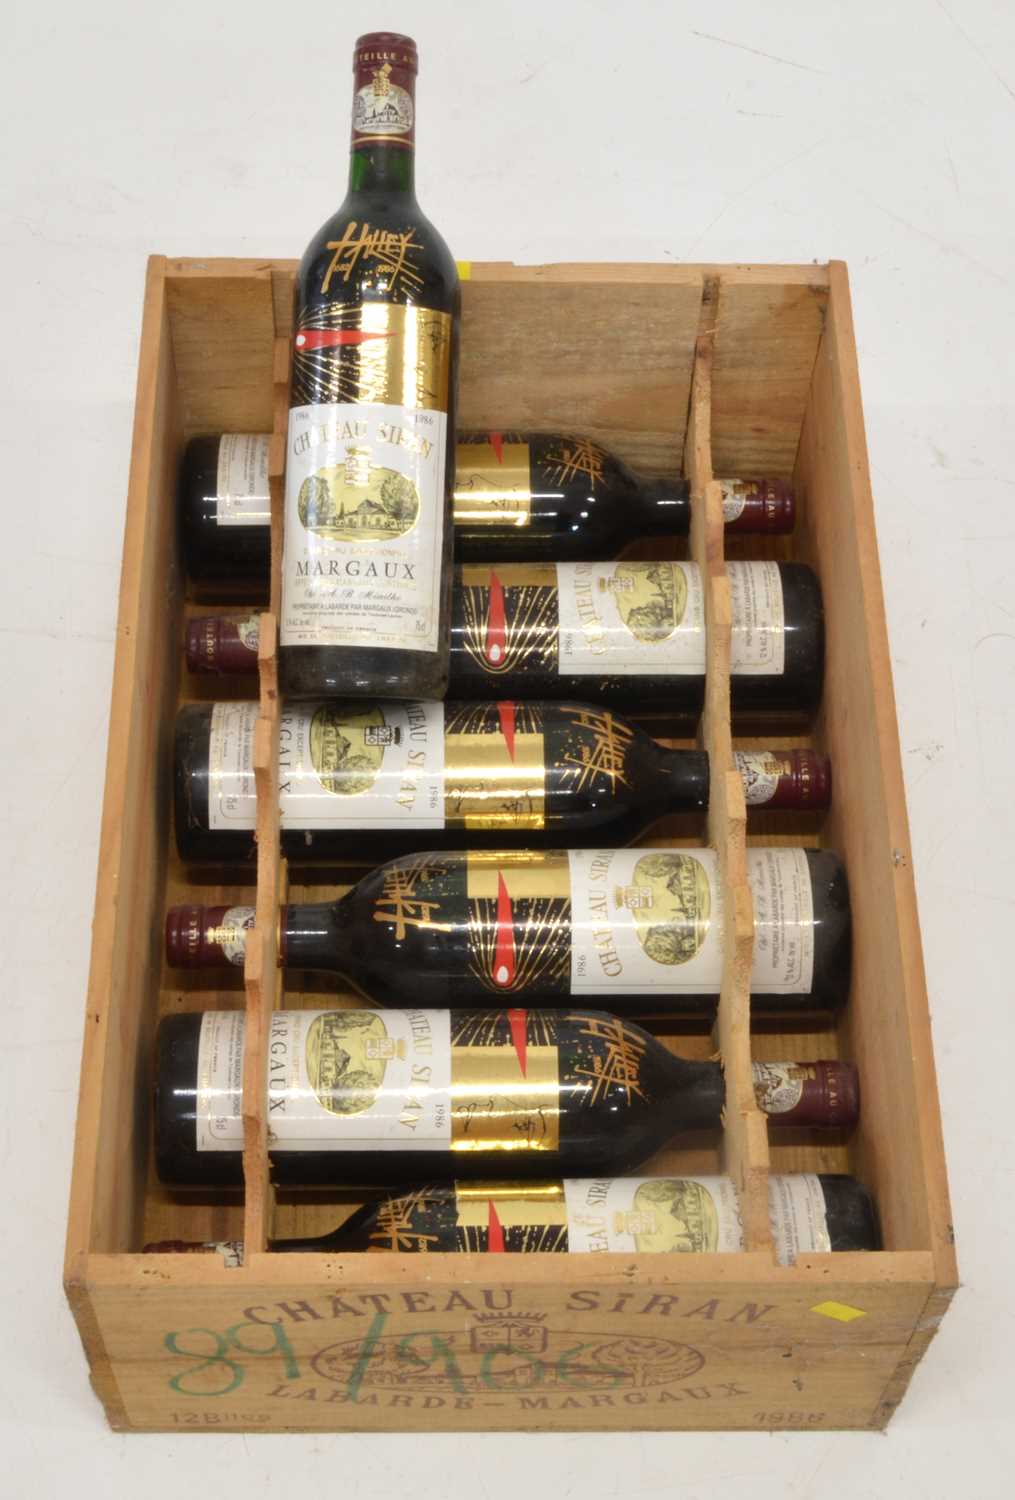 Lot 20 - Chateau Siran Grand Cru Bourgeois Exceptionnel Margaux 1986